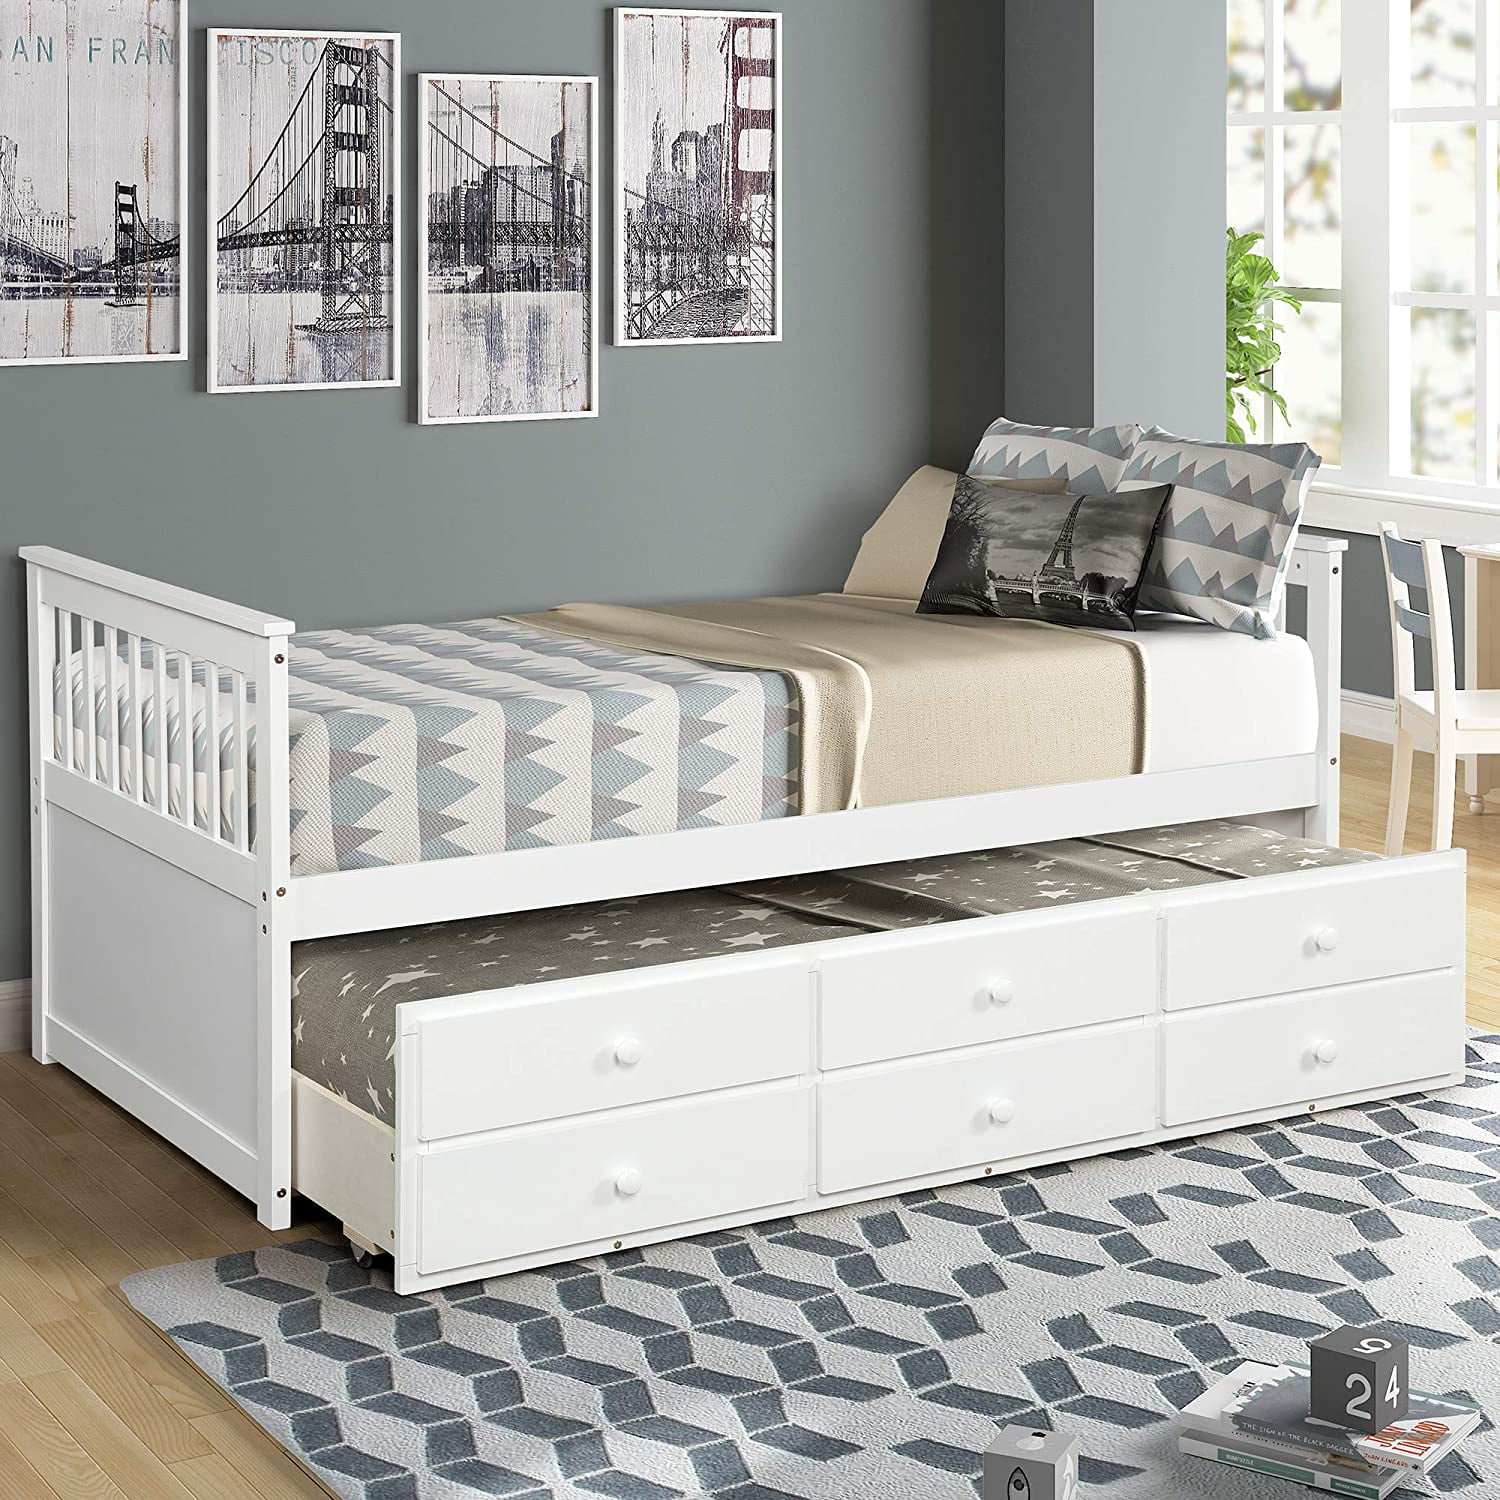 Wooden Platform Bed, Twin Captains Bed With Trundle And Storage Drawers